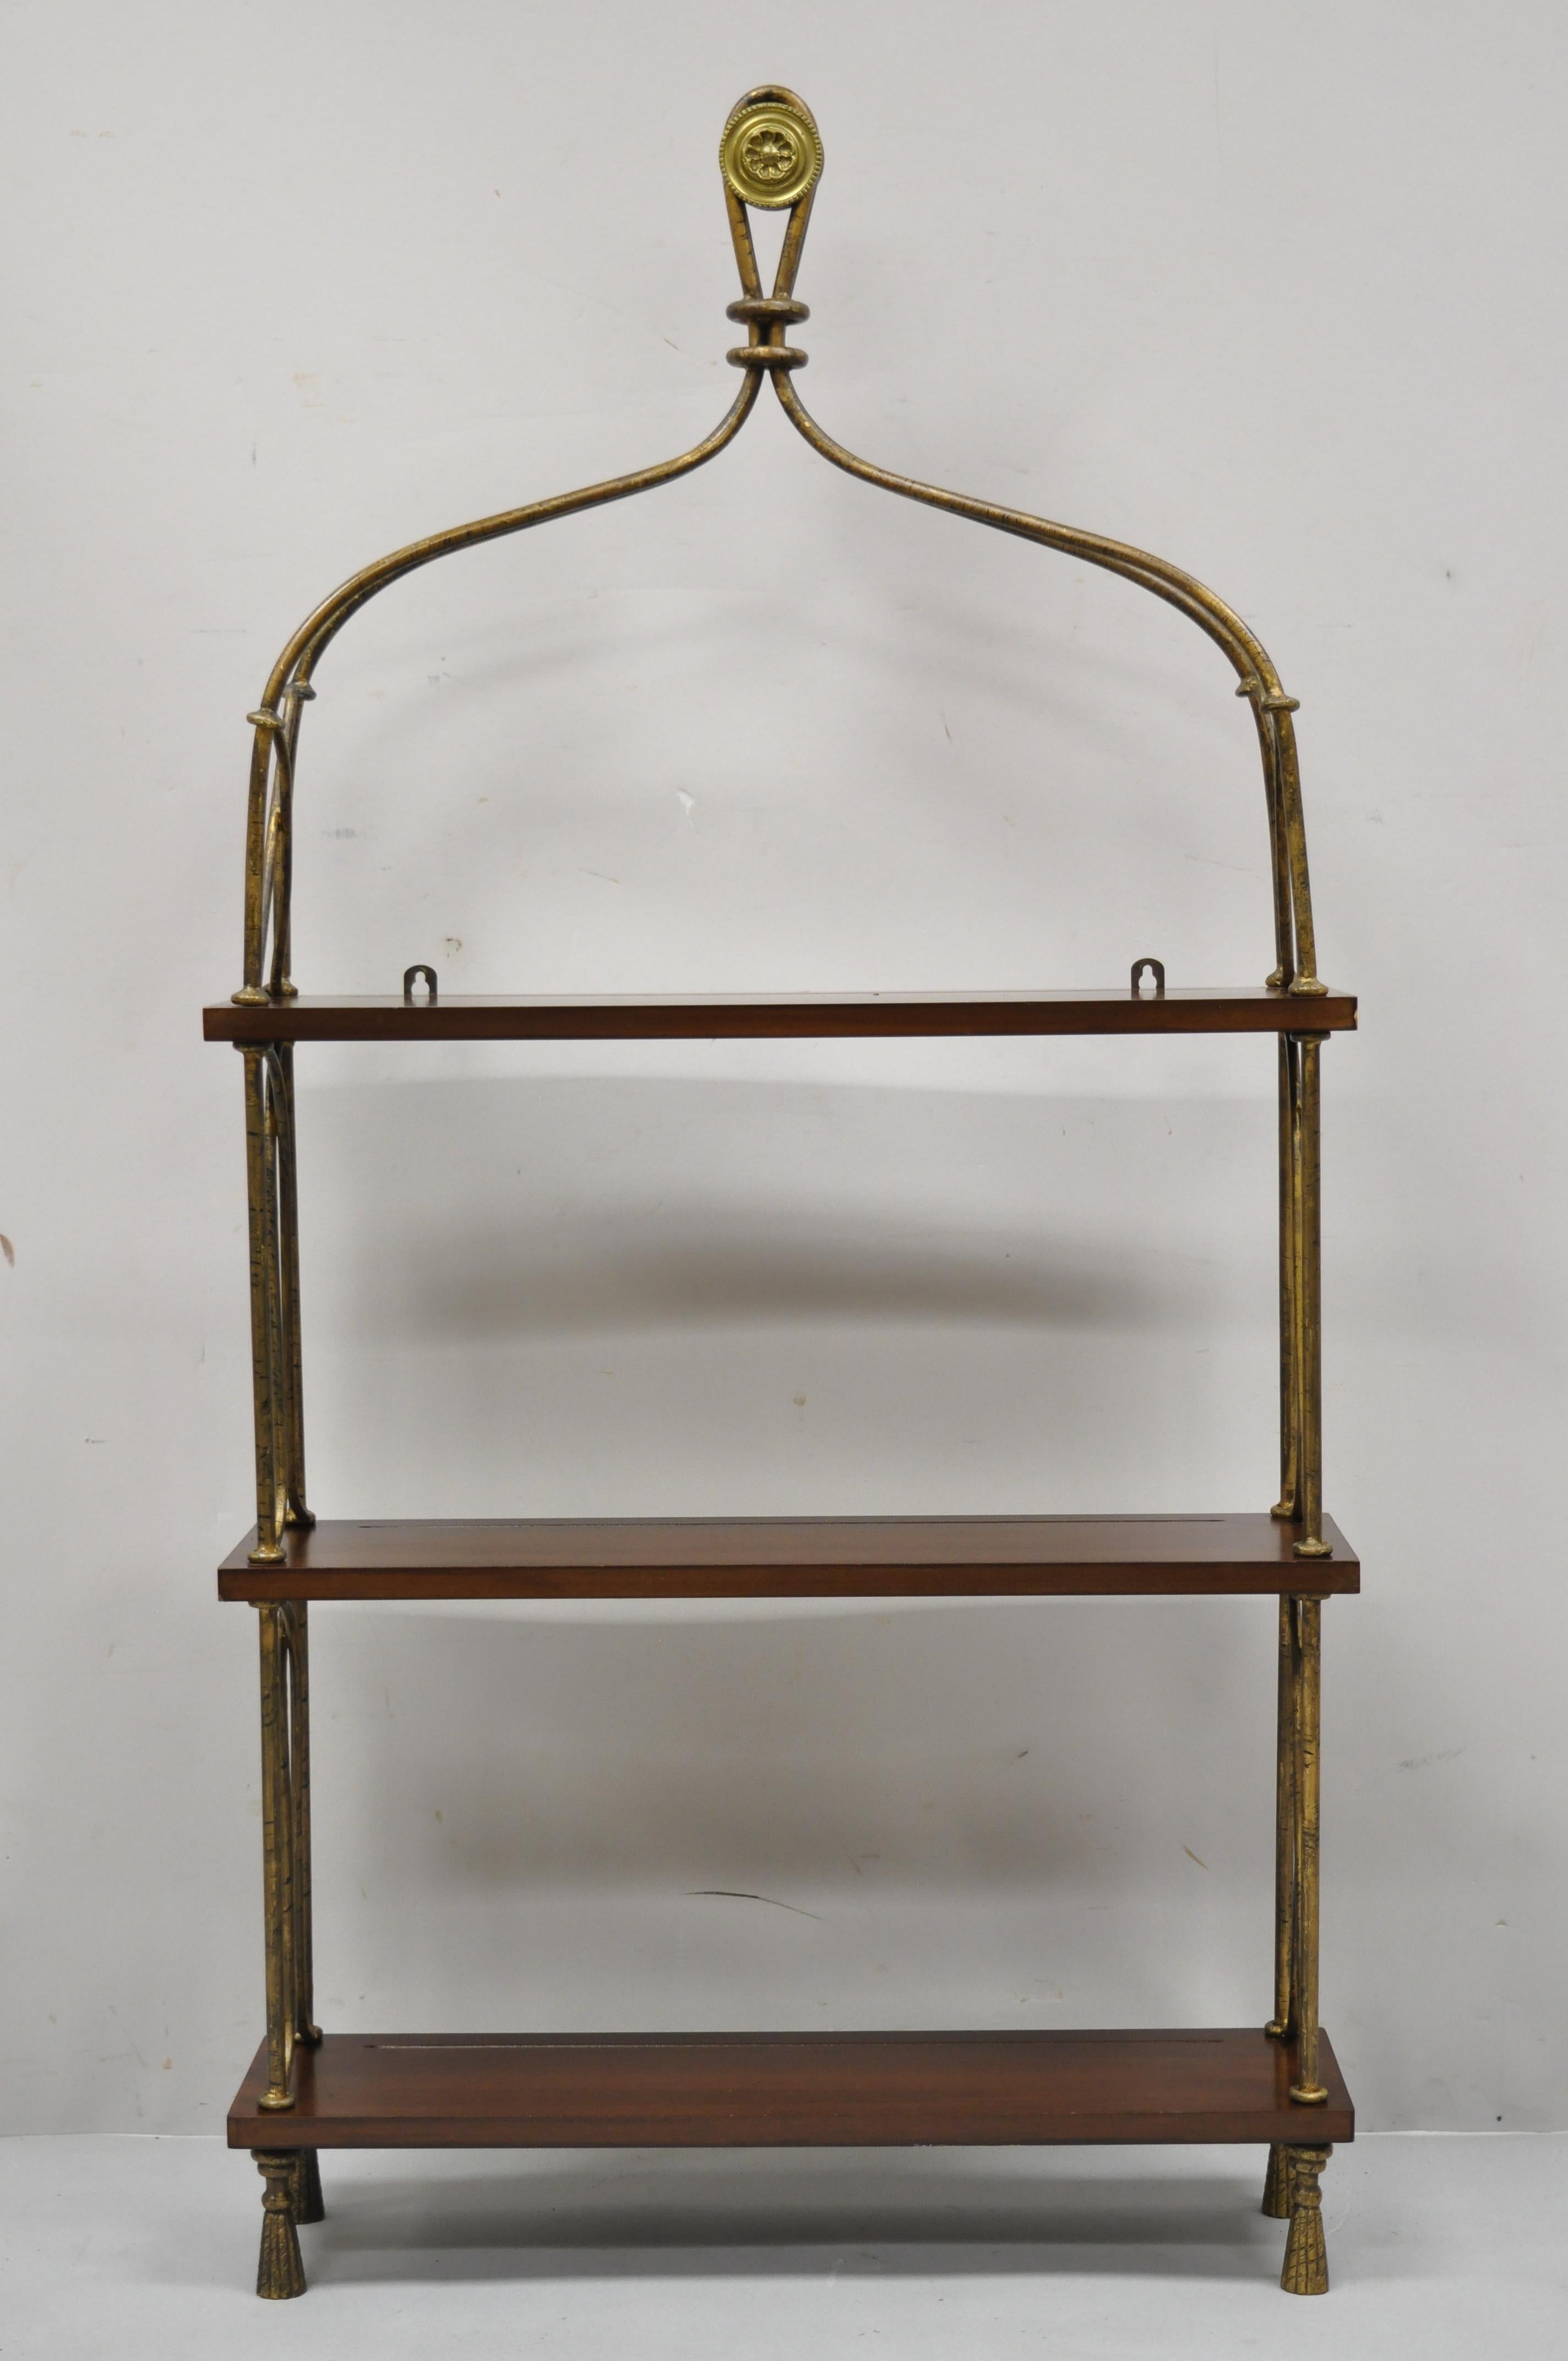 French style wrought iron and wooden shelf wall mount shelf curio display cabinet by Global Views. Item features iron tassel feet, iron frame, distressed gold finish, 3 solid wood shelves with plate grooves, brass medallion finial, original label,